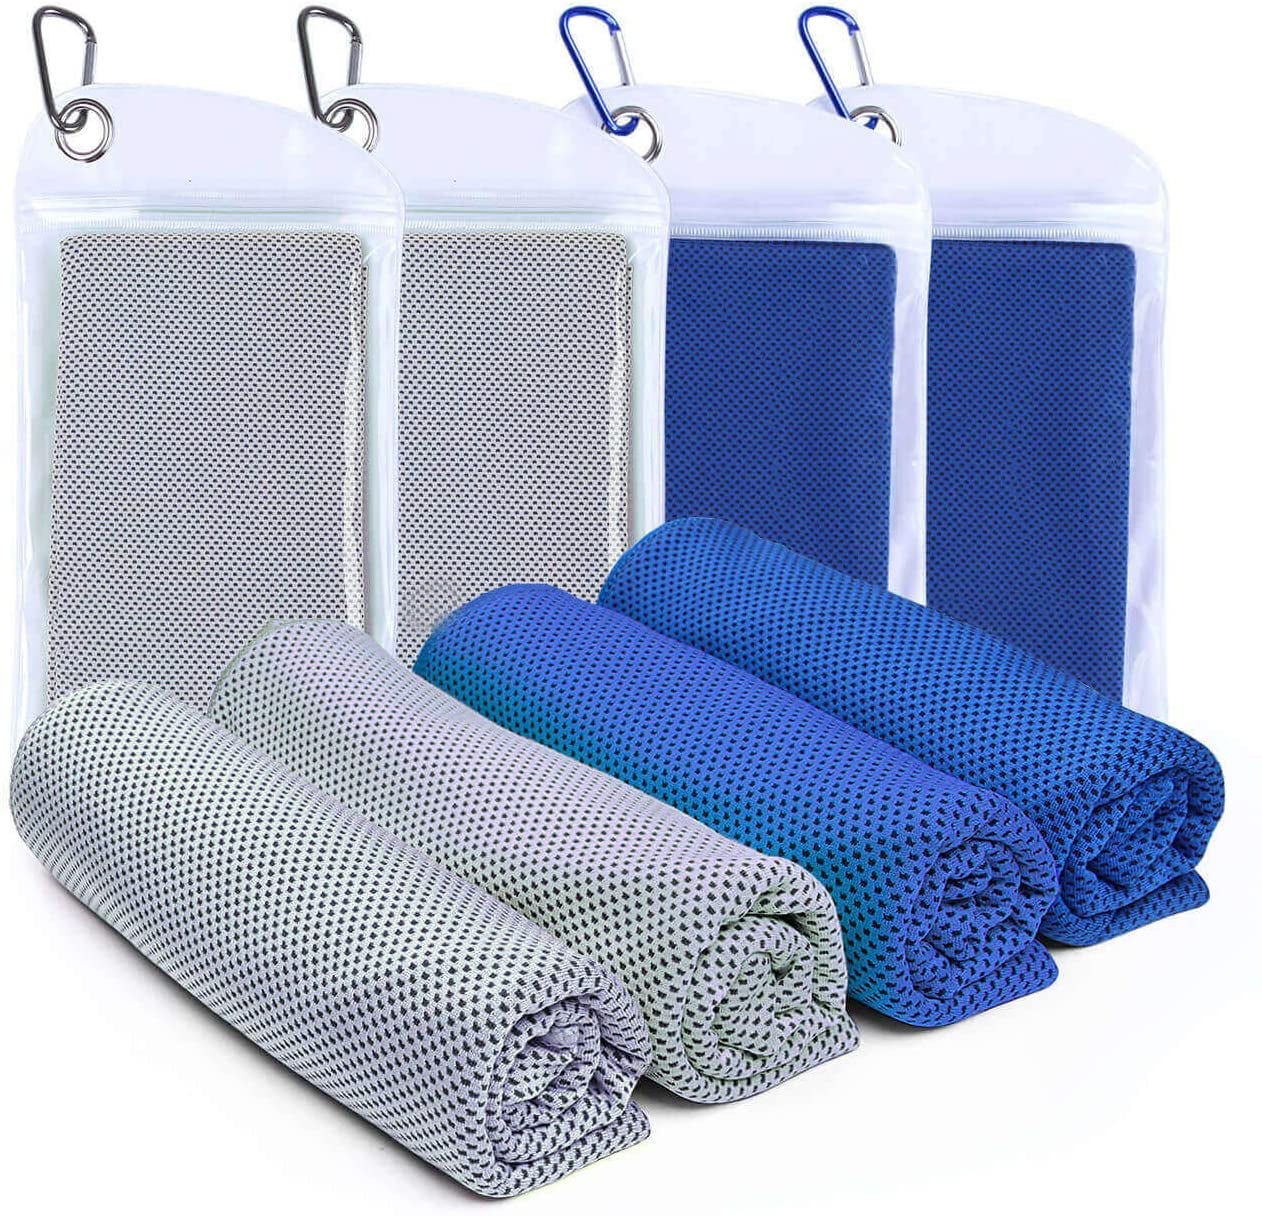 4 Pack Dark Blue/ Dark Gray/Brown/Black 40x12 Cooling Towel ,Ice Towel,Soft Breathable Chilly Towel,Microfiber Towel for Yoga,Sport,Running,Gym,Workout,Camping,Fitness,Workout & More Activities 